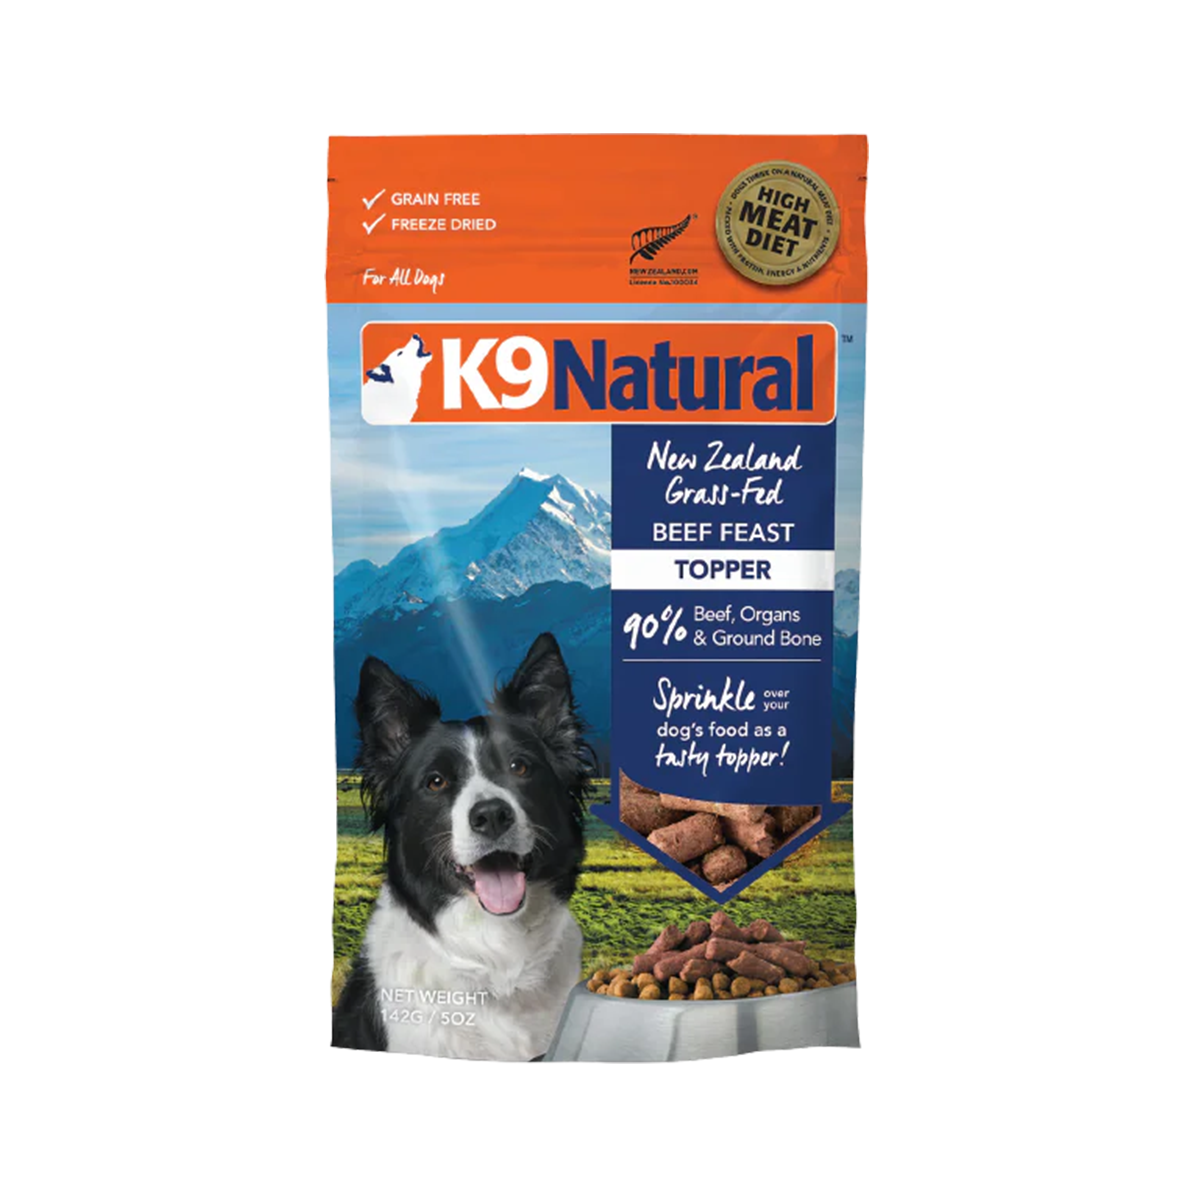 K9 Natural Freeze-Dried Dog Food Topper - Beef